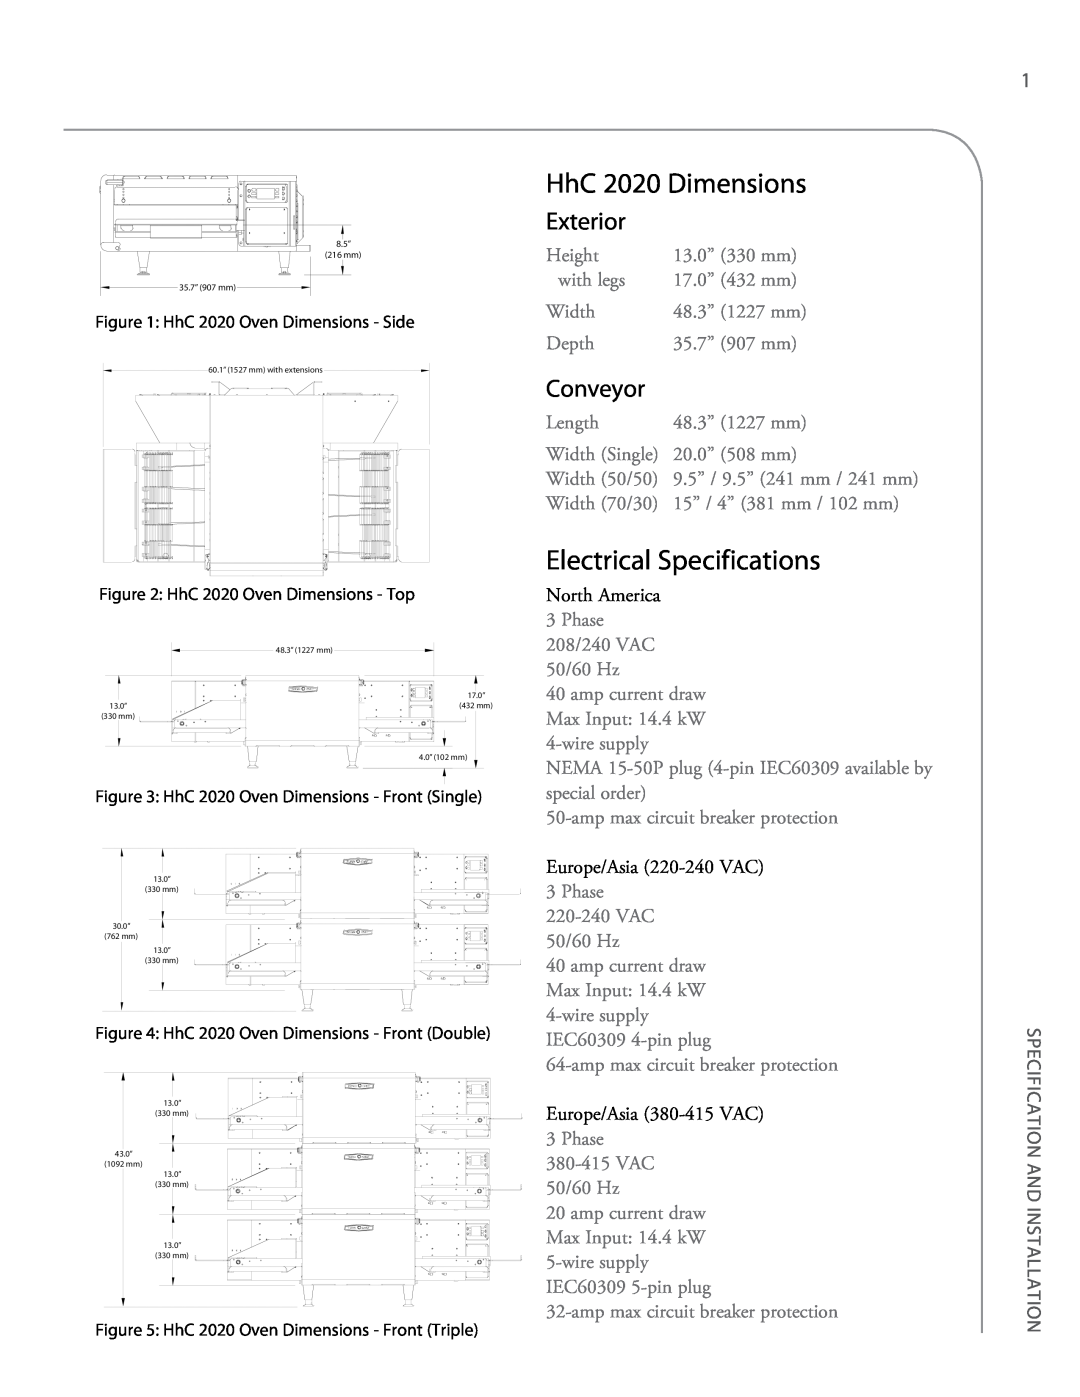 Turbo Chef Technologies 2620 owner manual HhC 2020 Dimensions, Electrical Specifications, Exterior, Conveyor 